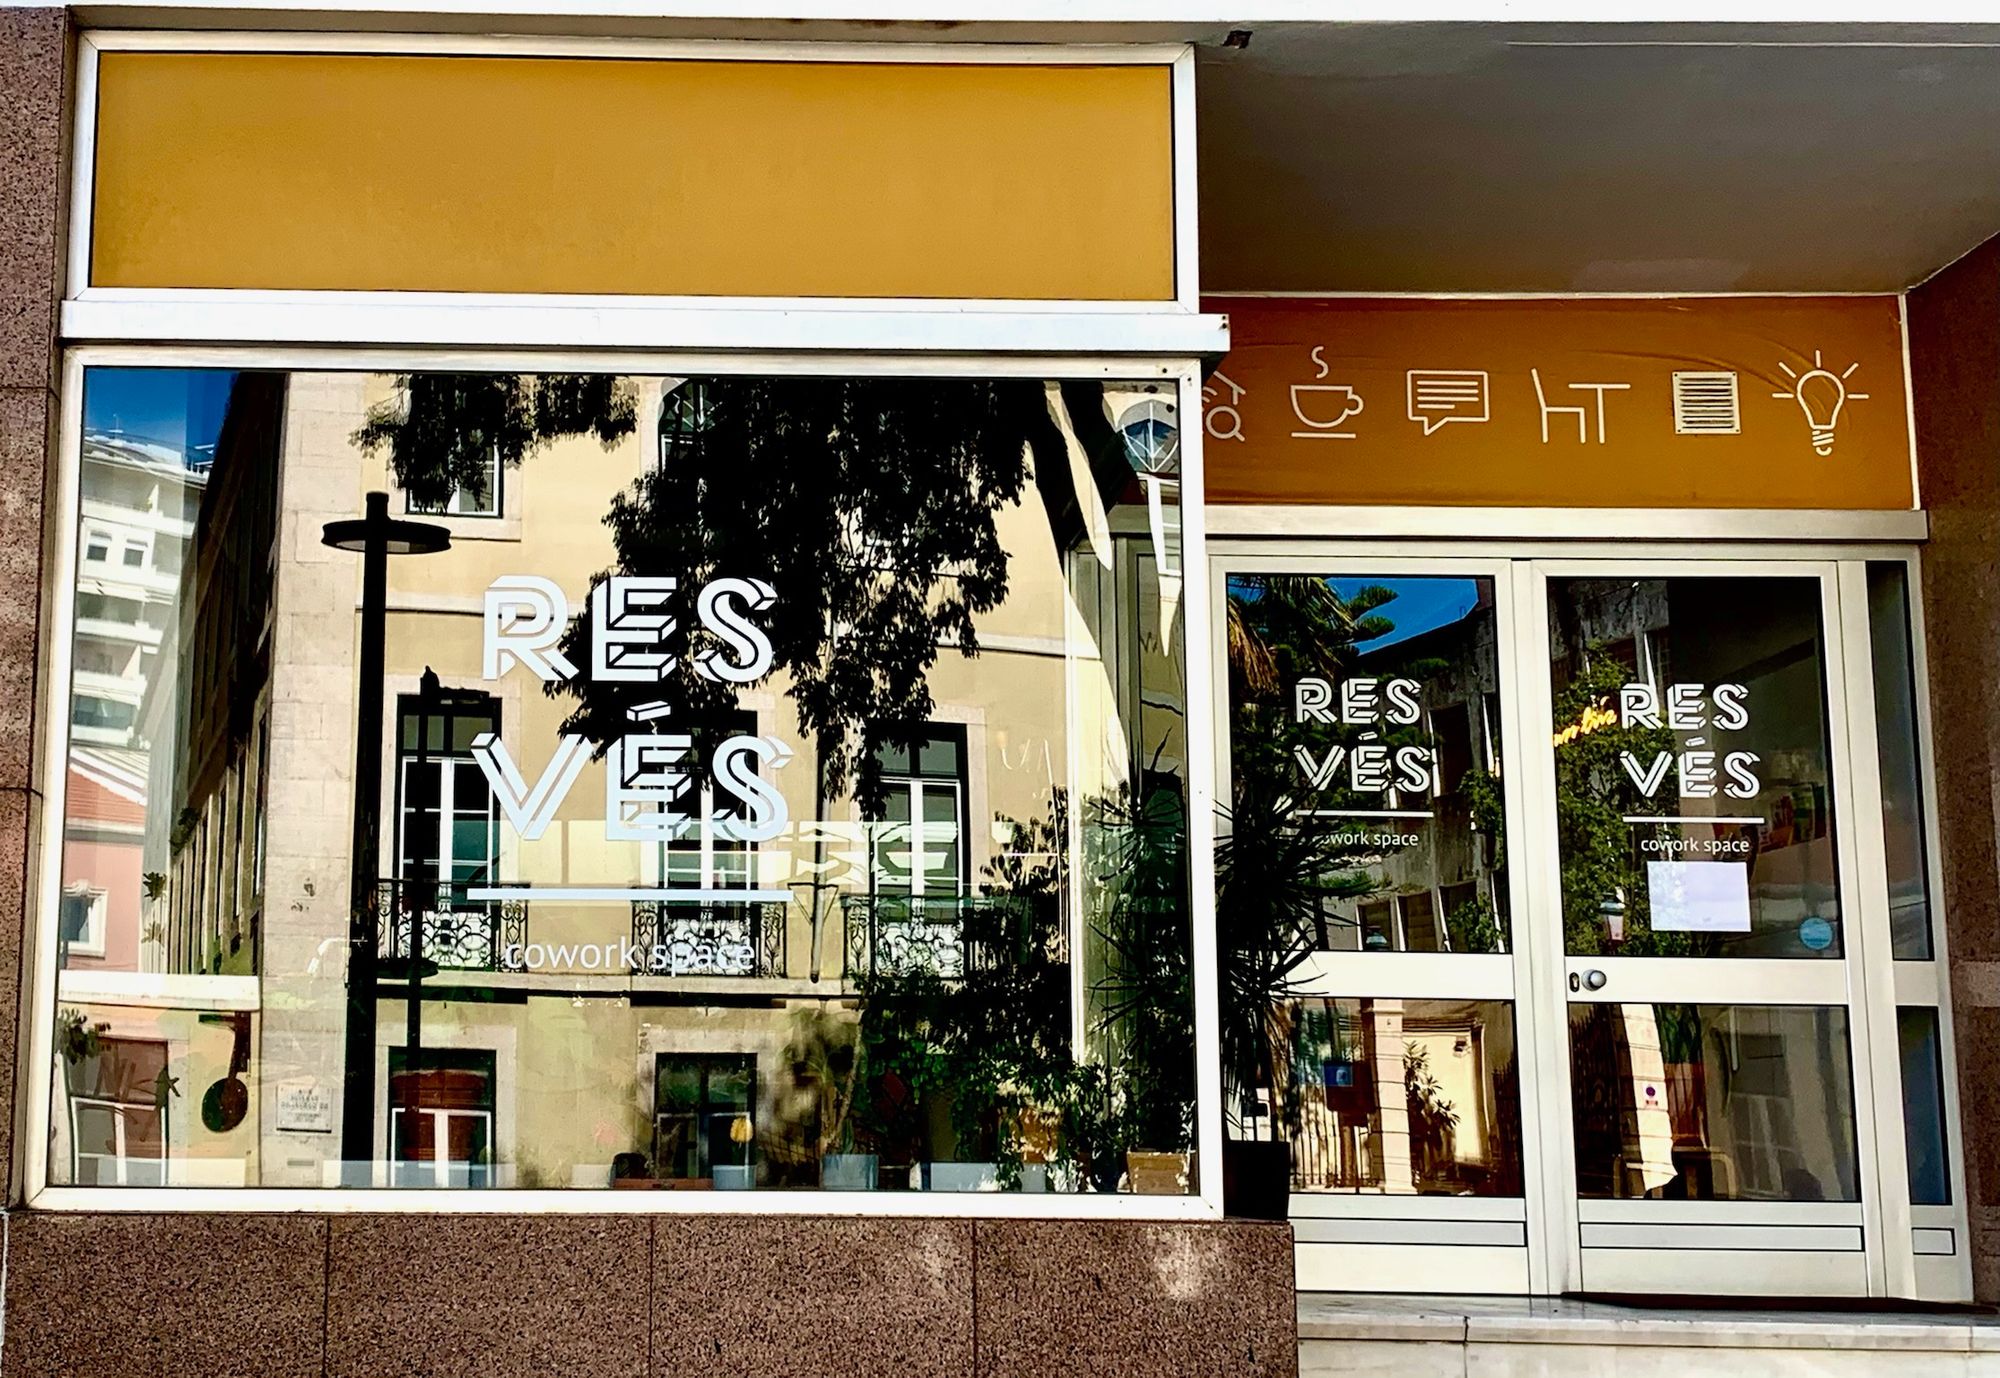 RESVES exterior in sunny Lisbon neighborhoods "coworking space"